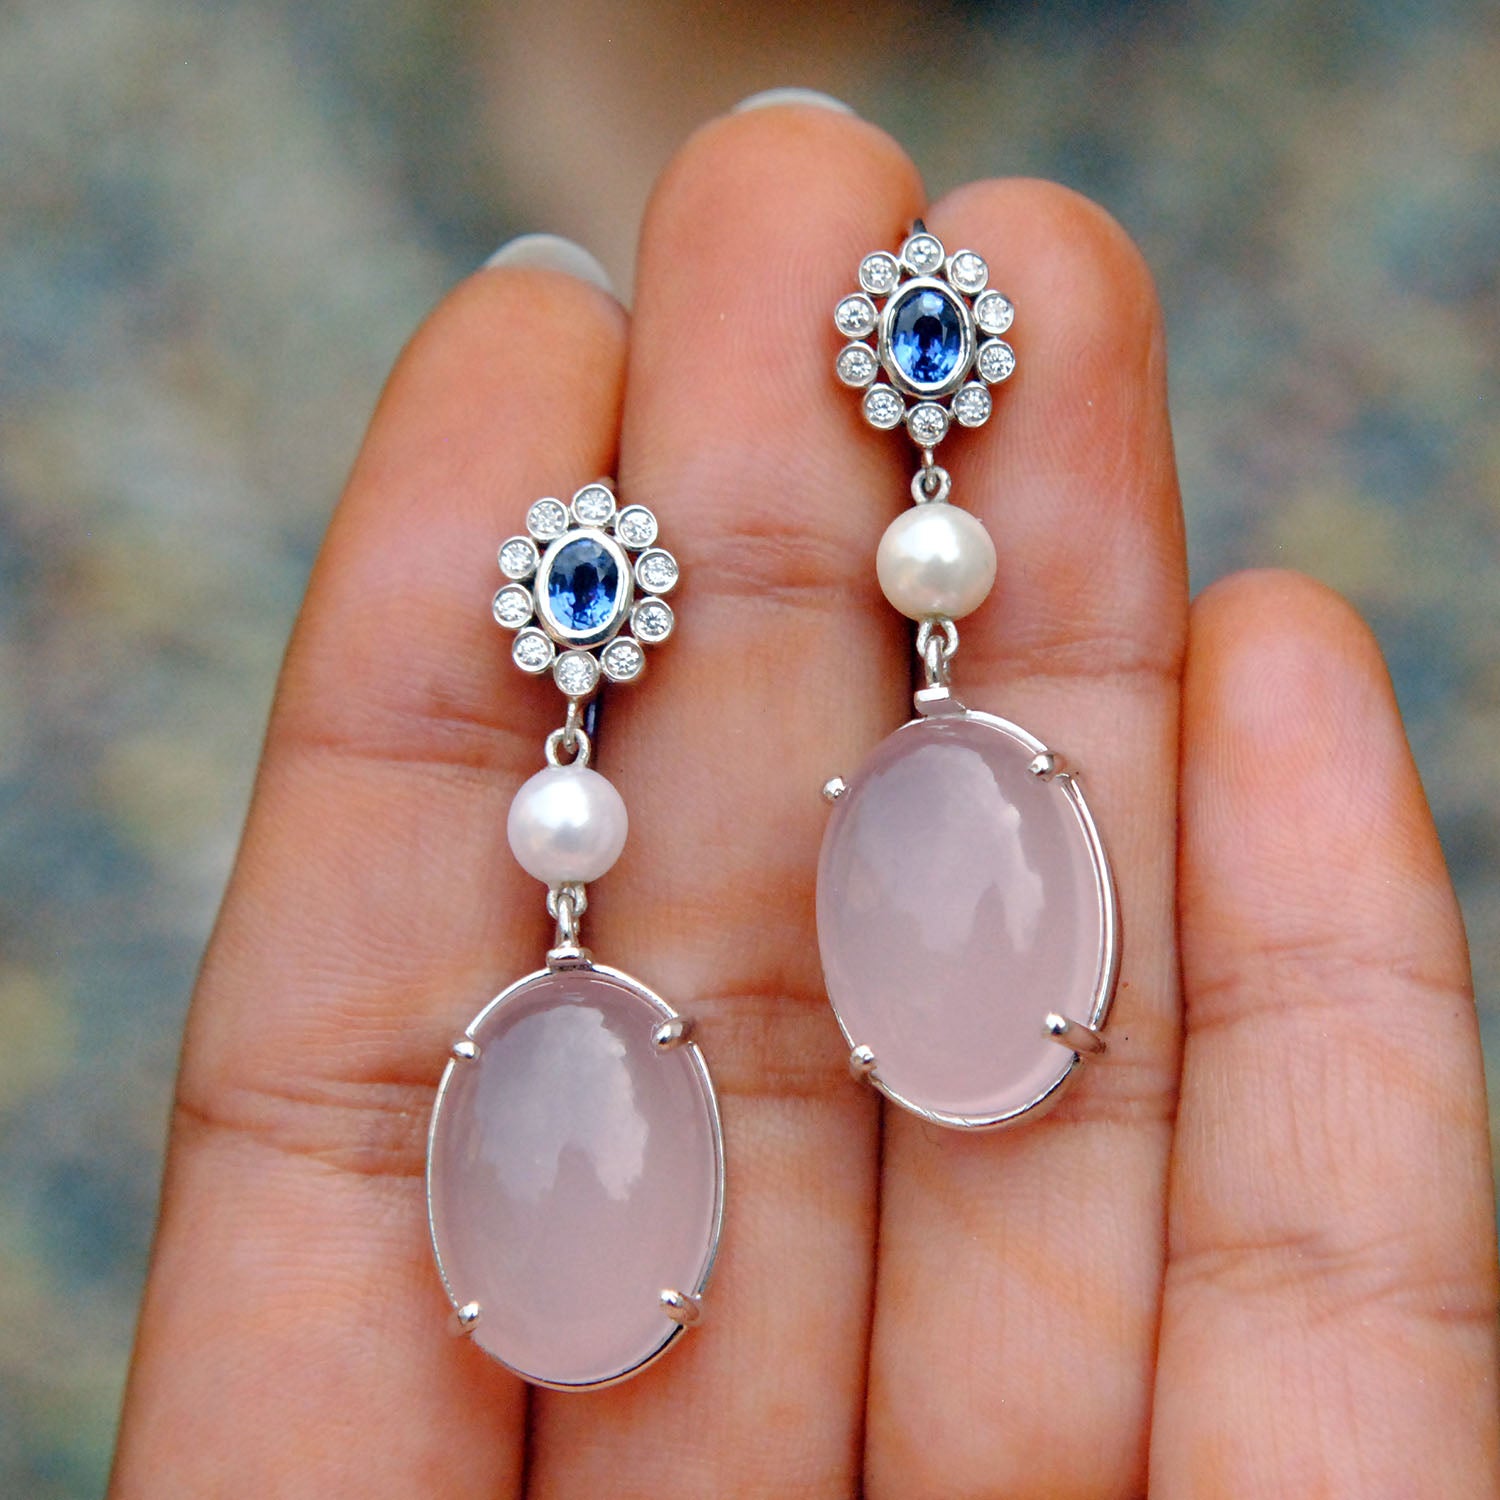 Sapphire blue stone and cz pearl drop earrings 